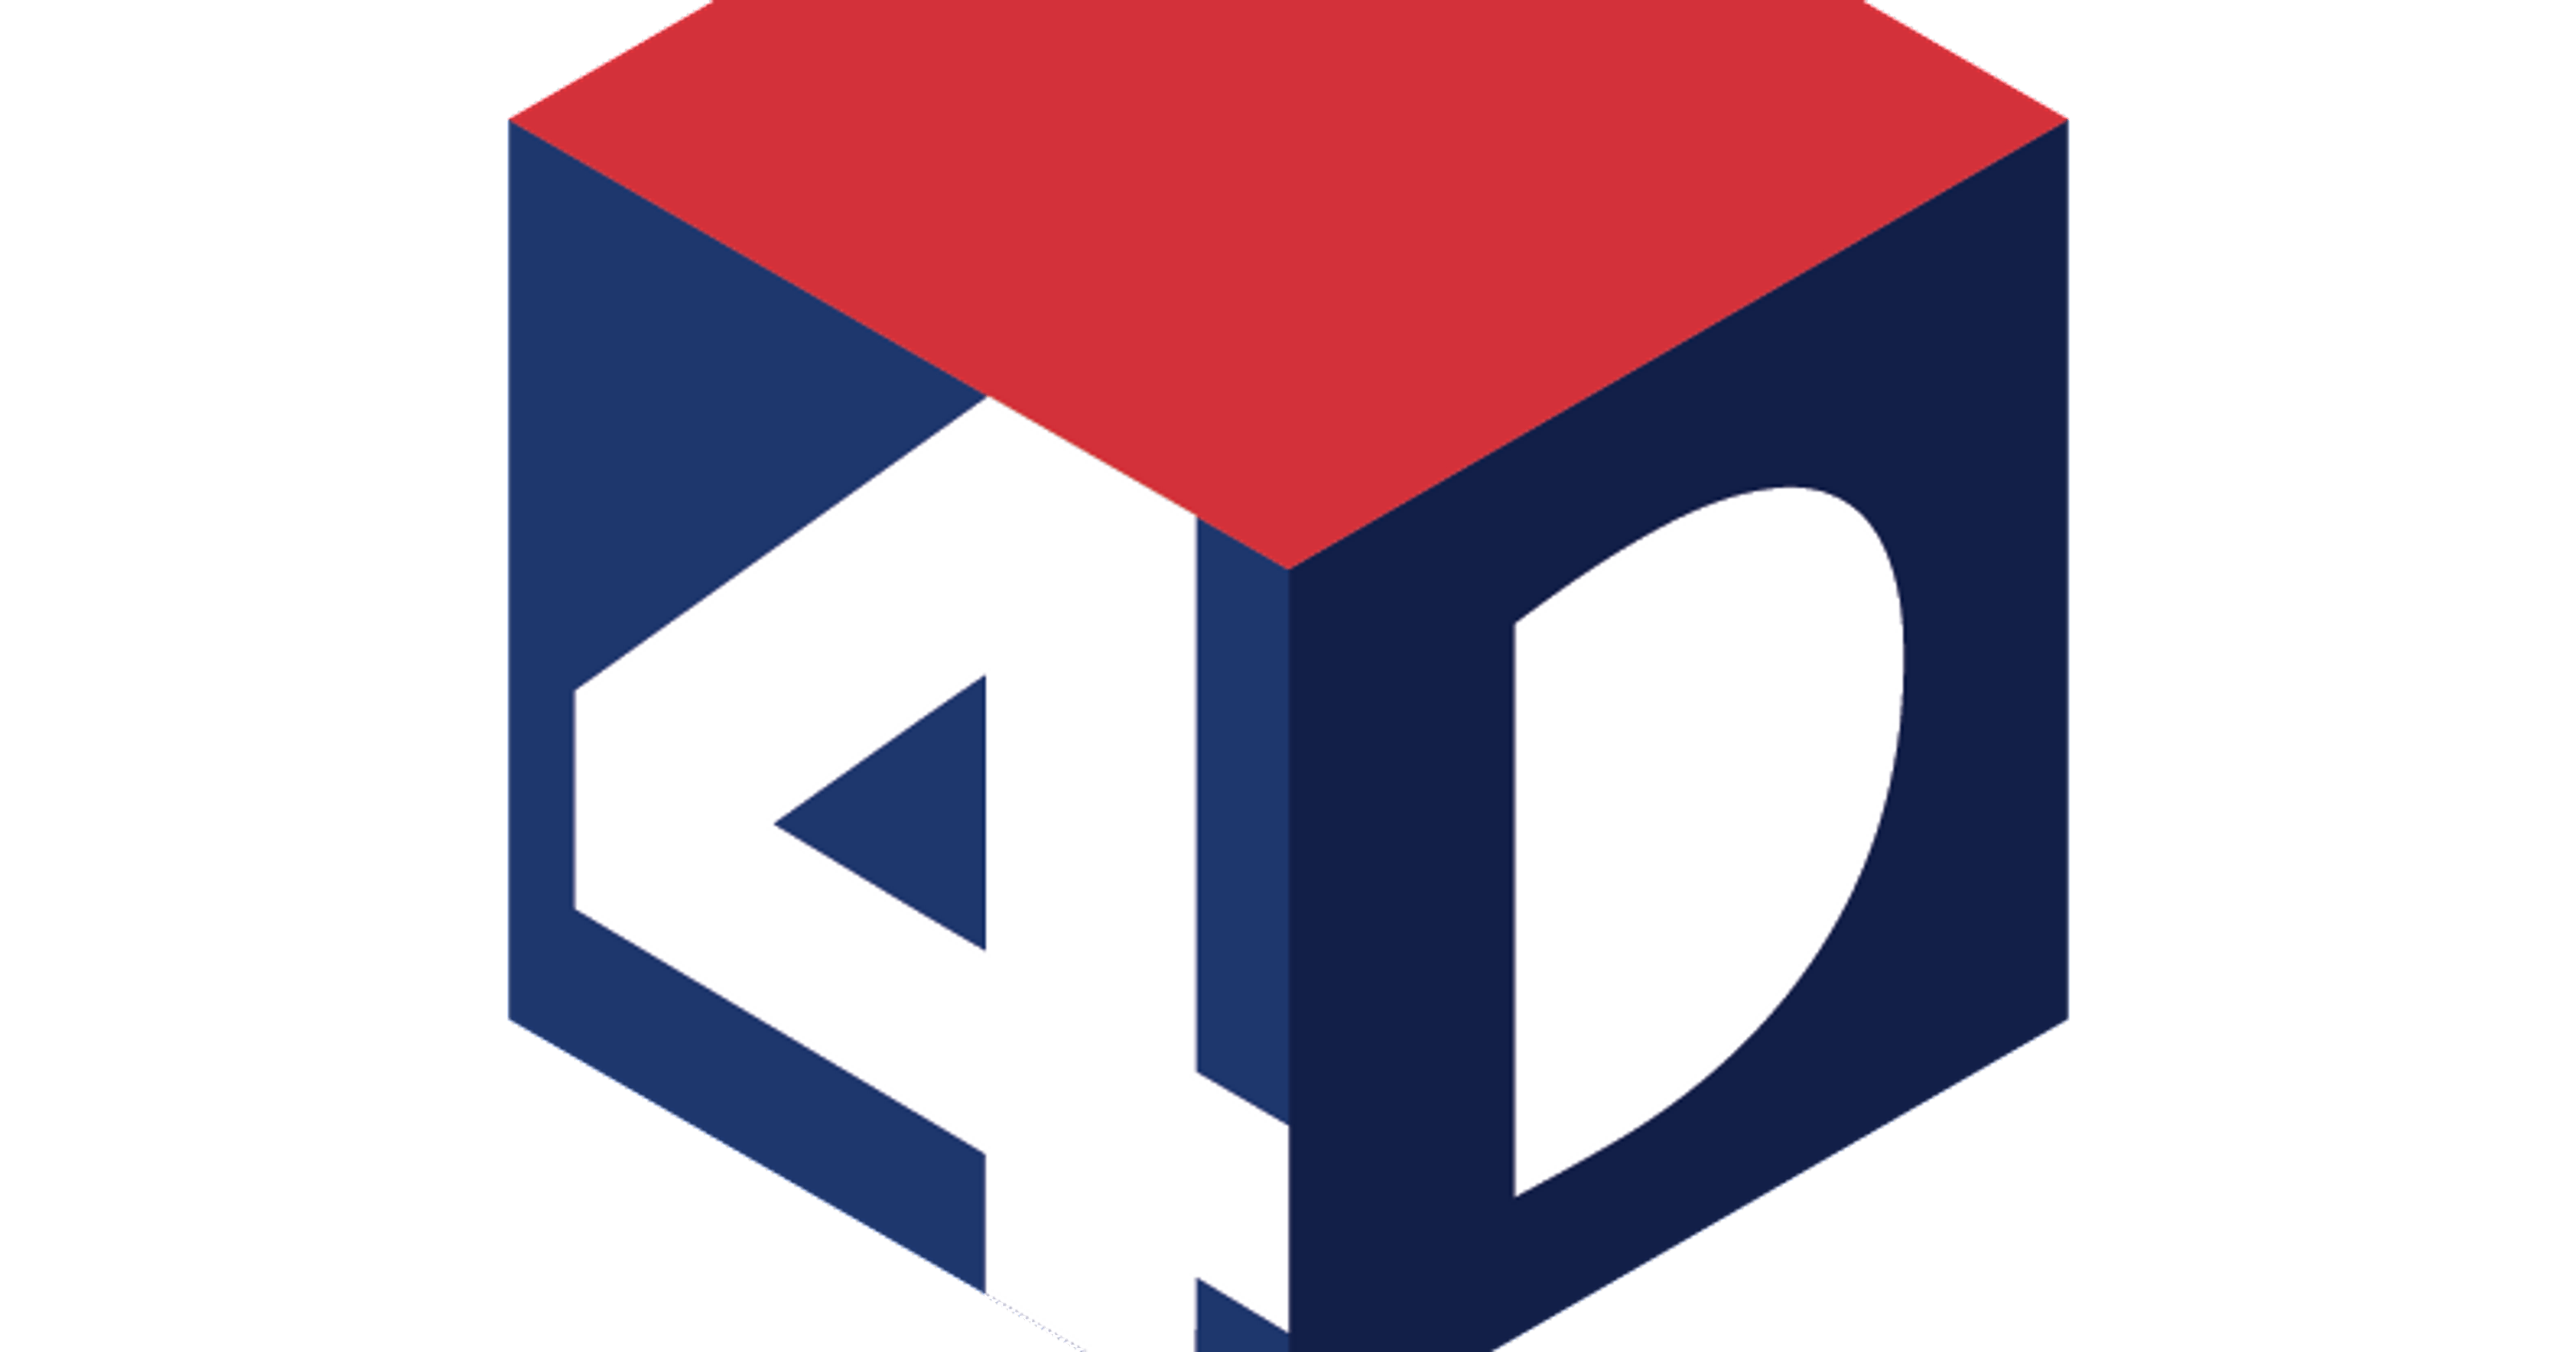 4D Logo - Kids learn architecture through LEGO, Minecraft in new summer camp